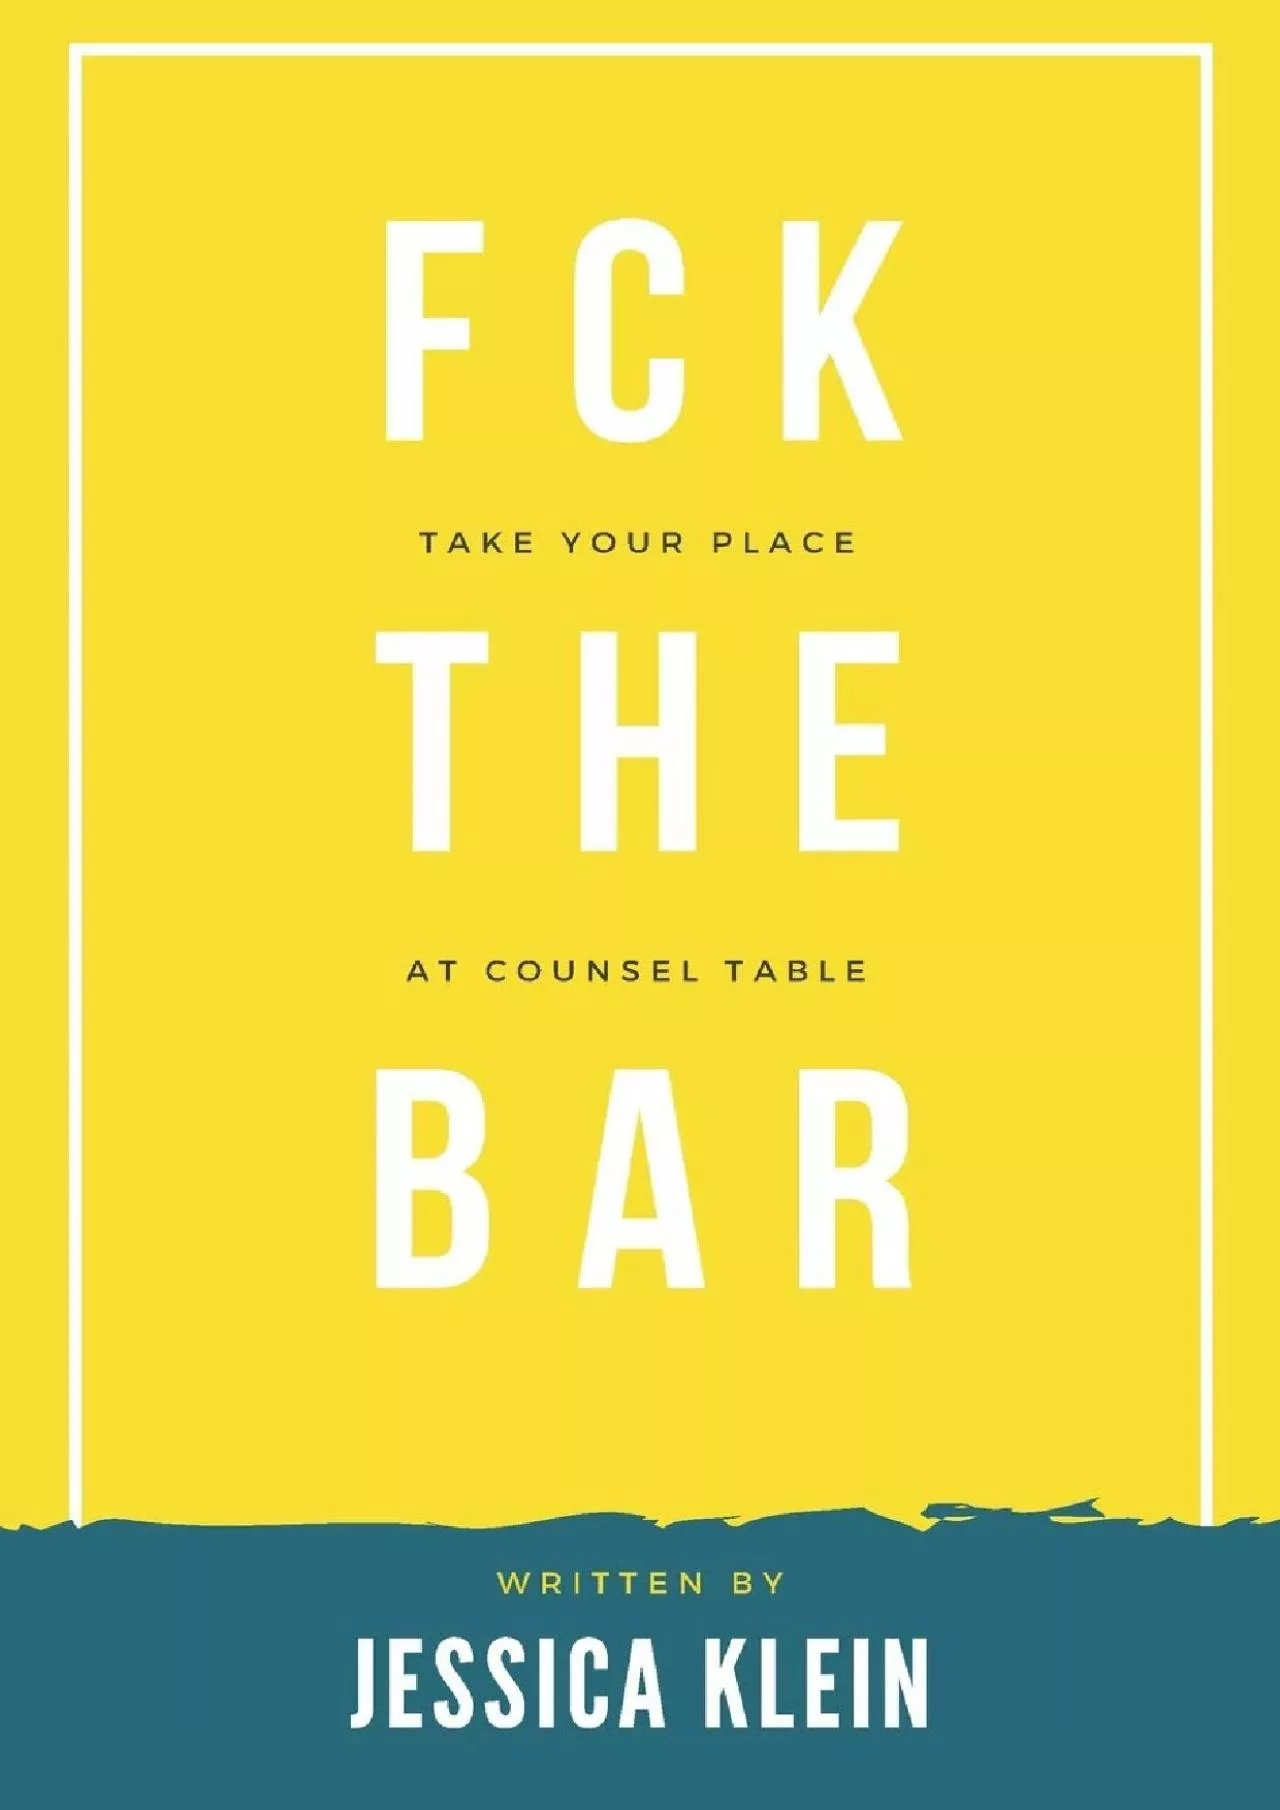 [EBOOK] Fck The Bar: Take Your Place at Counsel Table